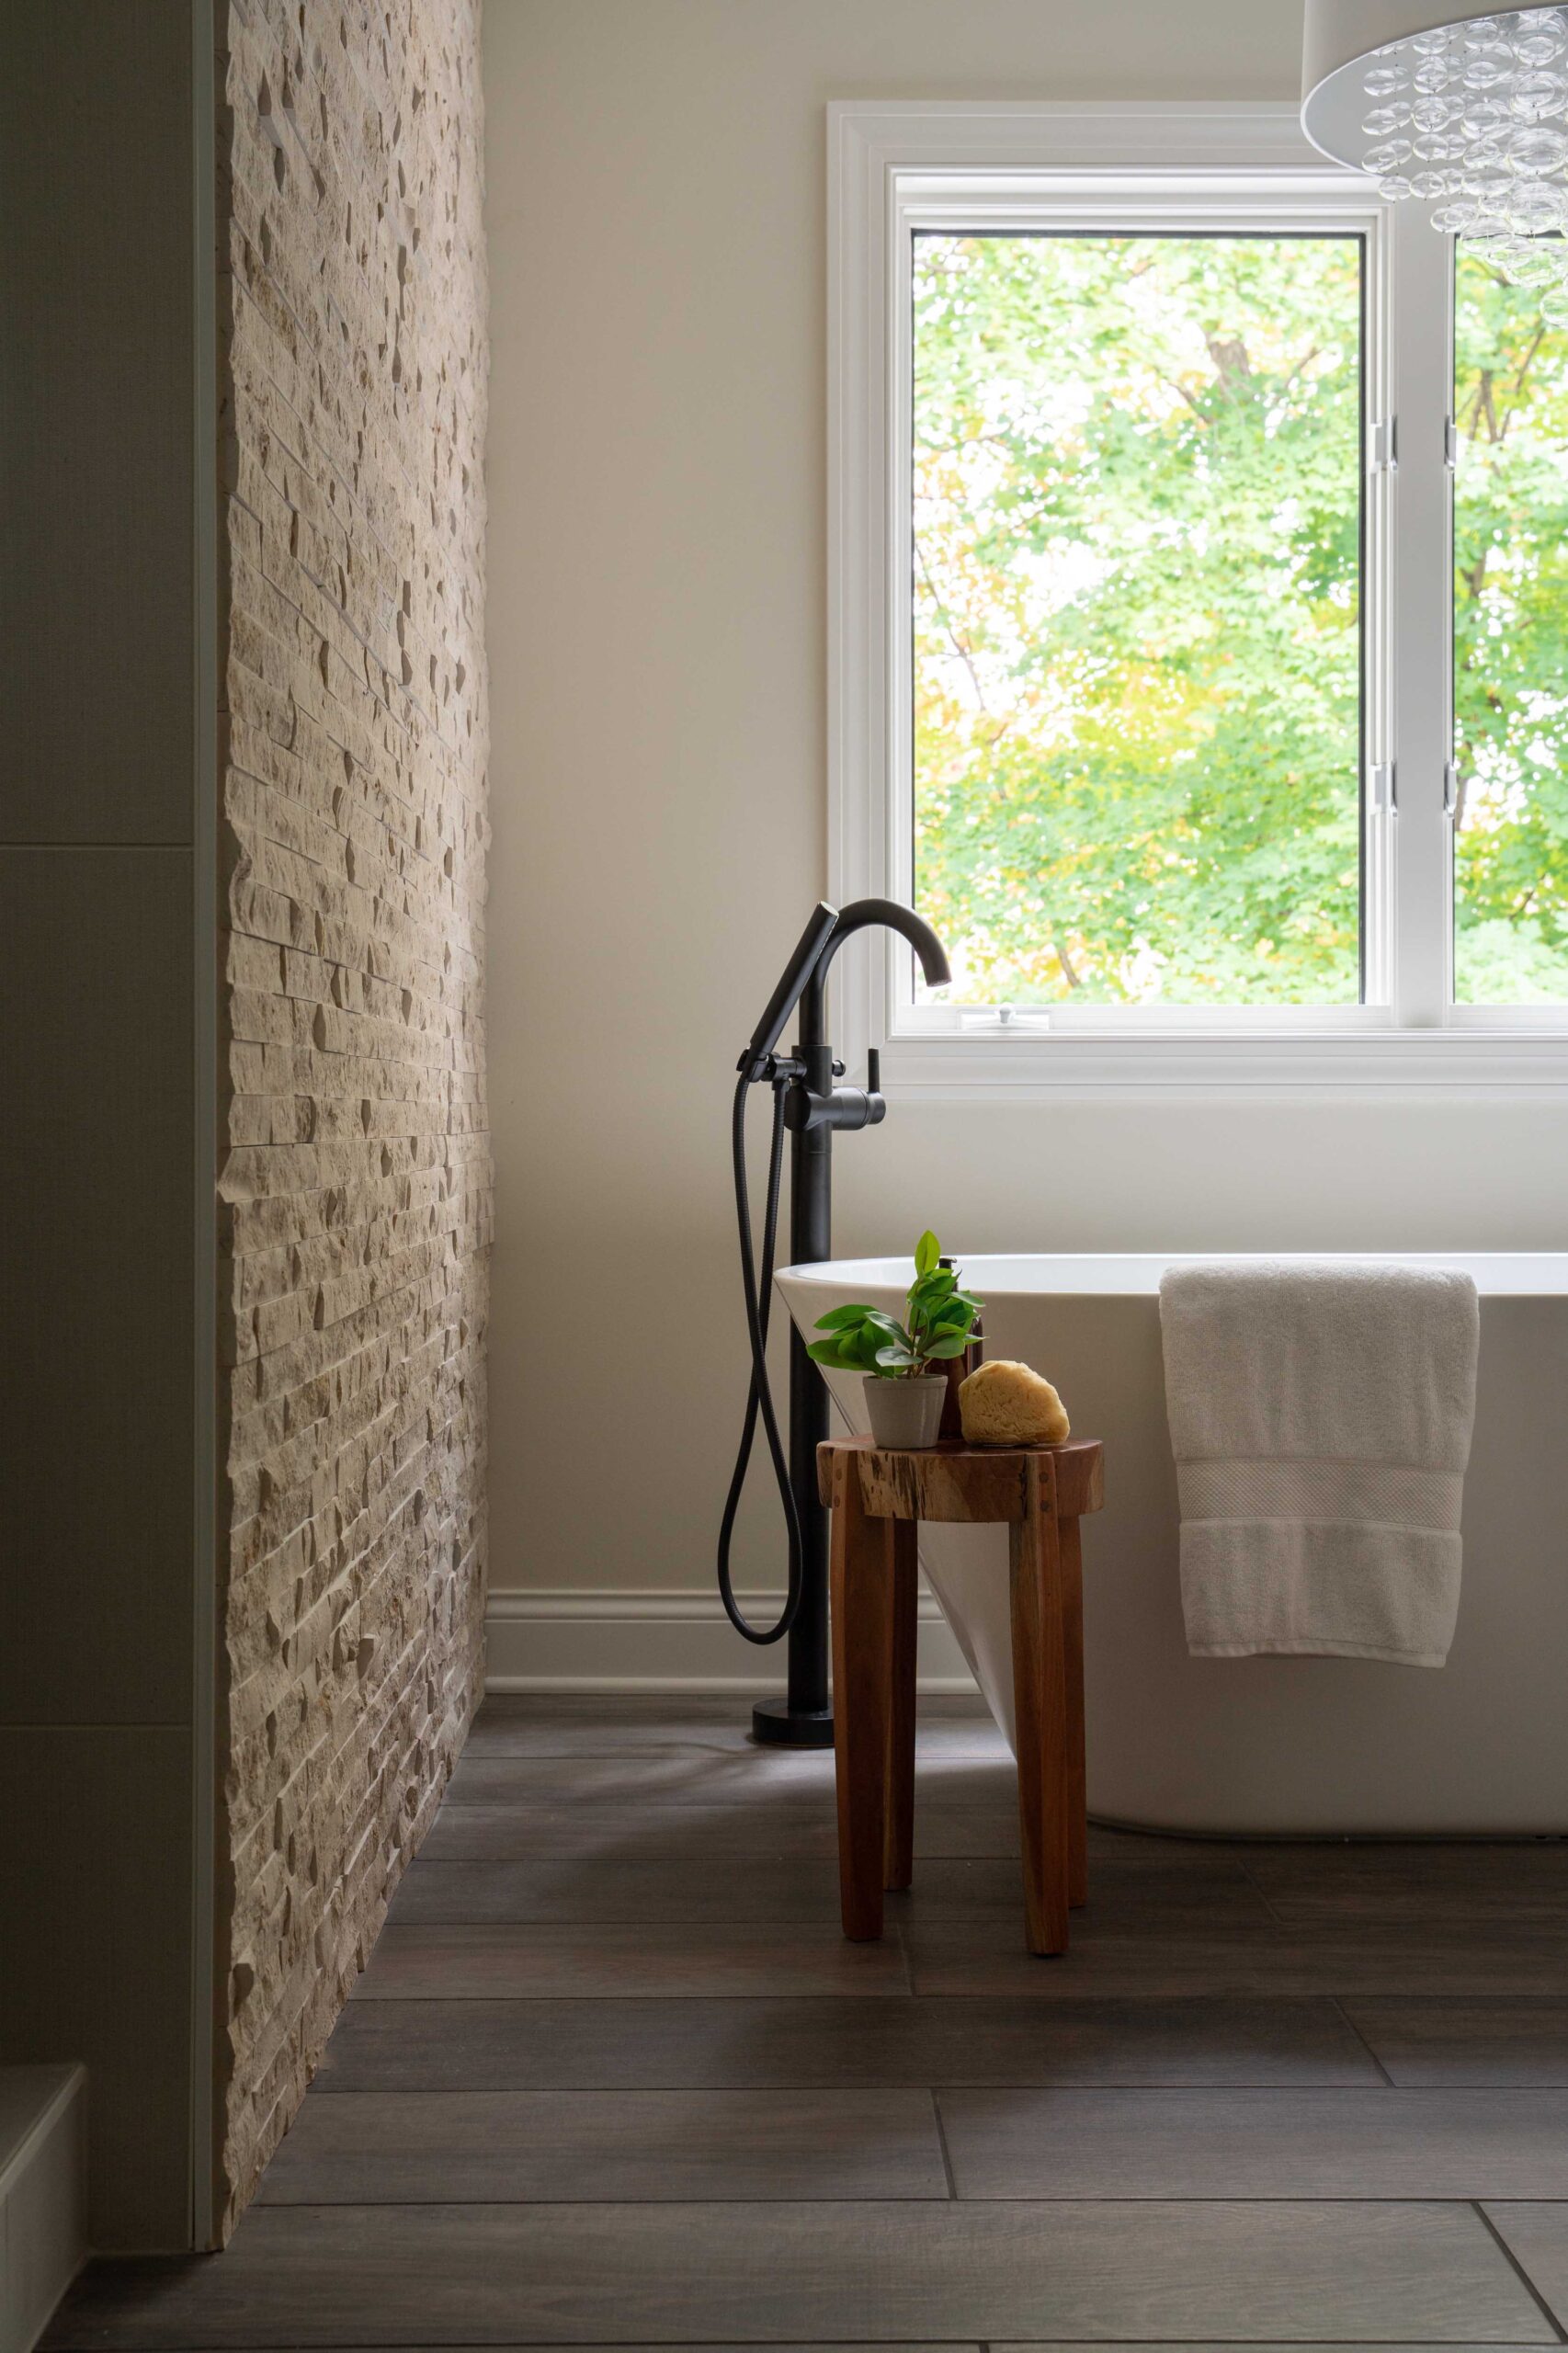 A bathroom with a wooden floor and a window located in Minnetonka, underwent a remodel on Woodside Road.